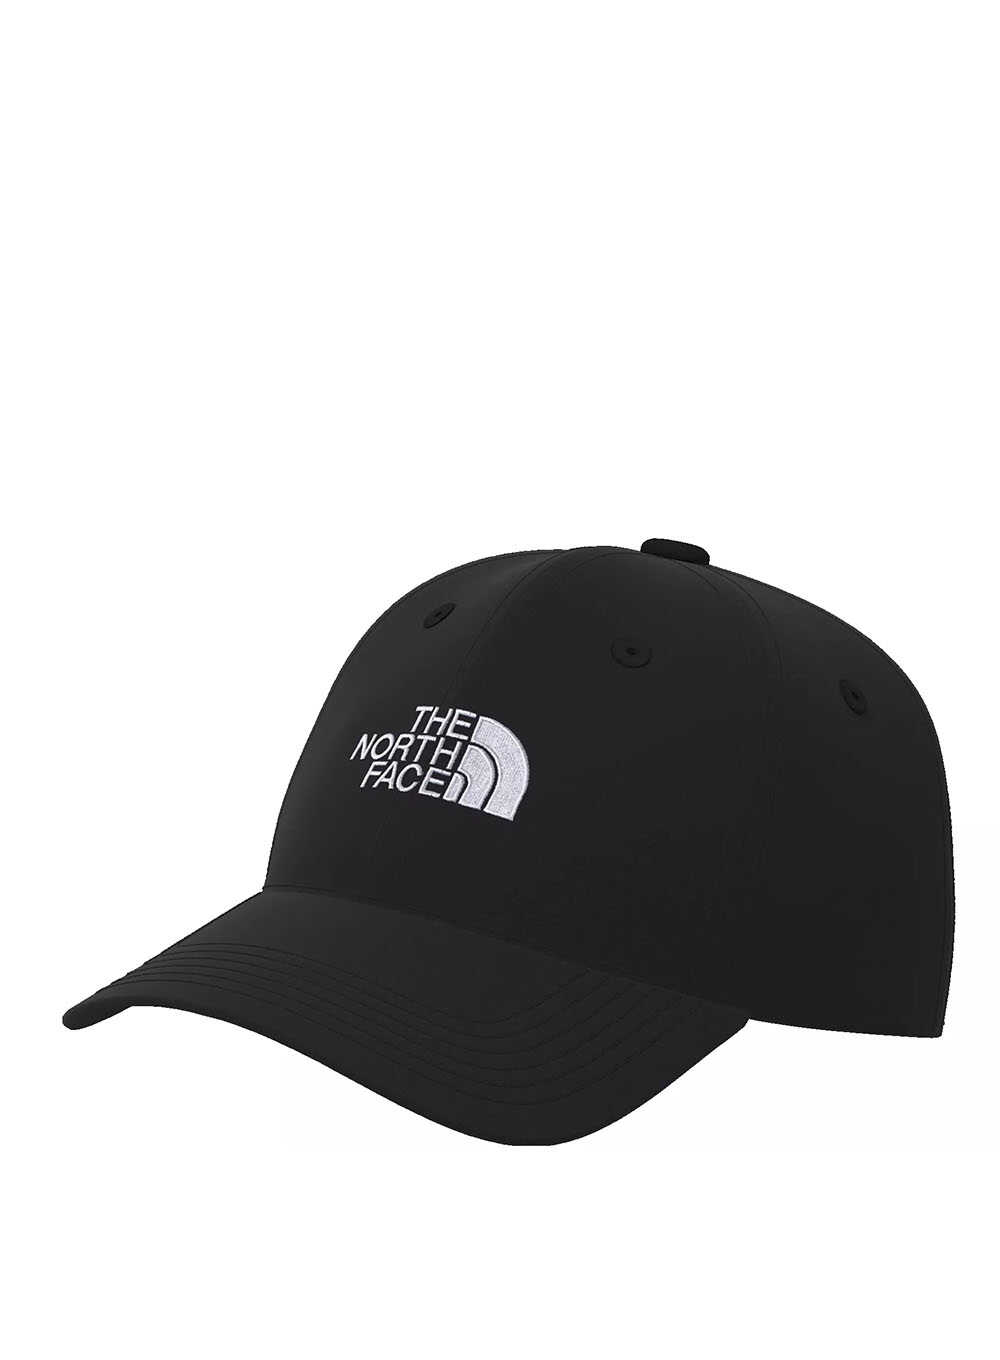 Czapka The North Face RECYCLED 66 CLASSIC - tnf black / tnf white